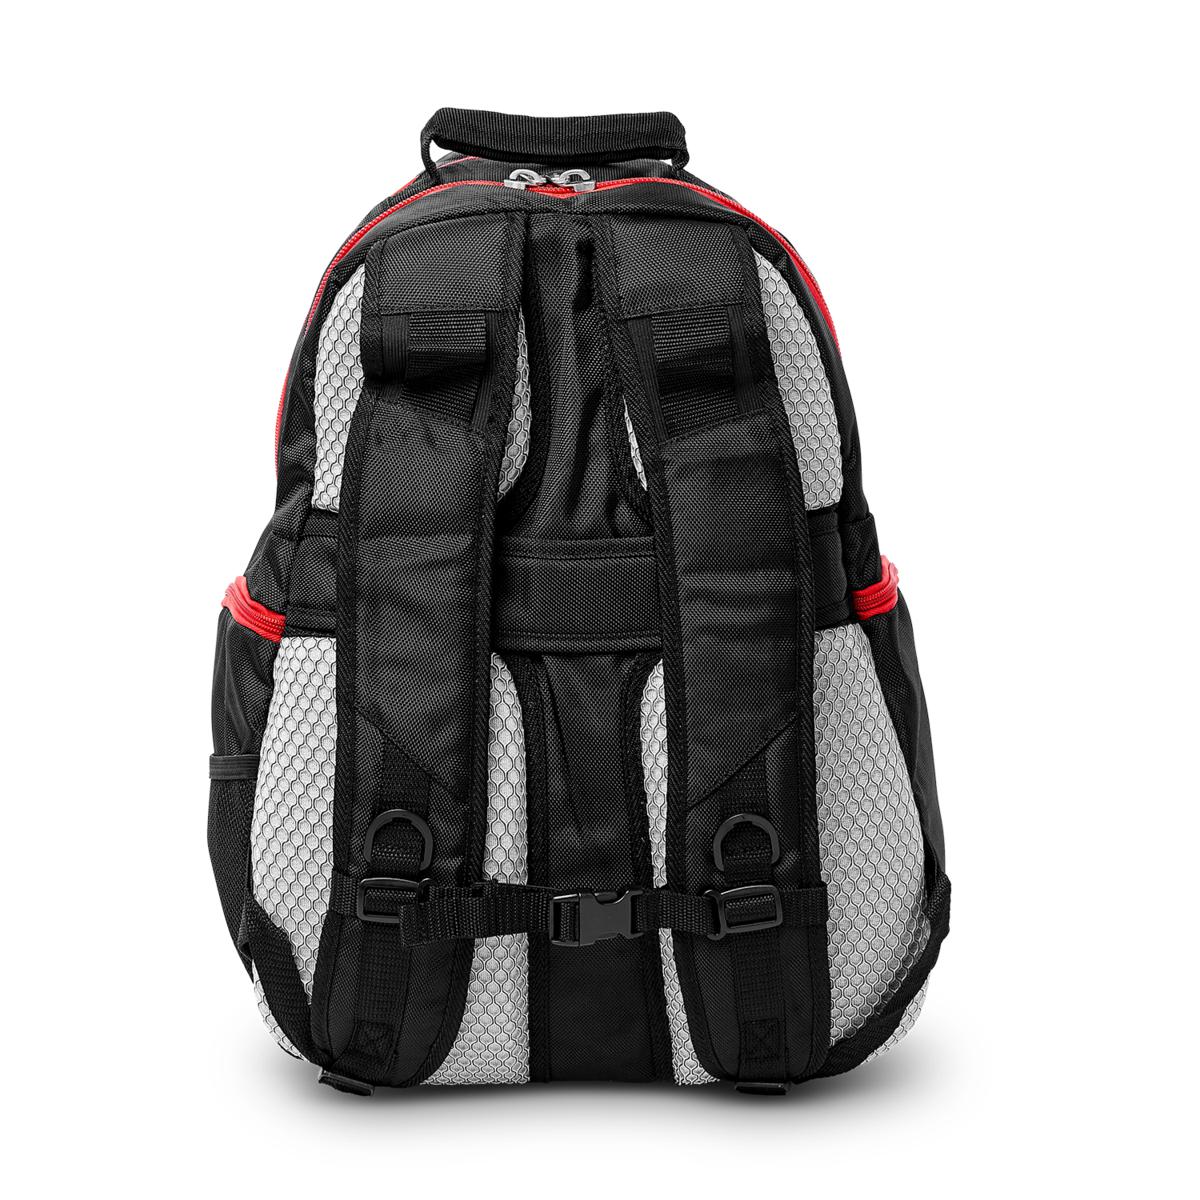 St. Louis Cardinals 19'' Premium Wheeled Backpack - Gray